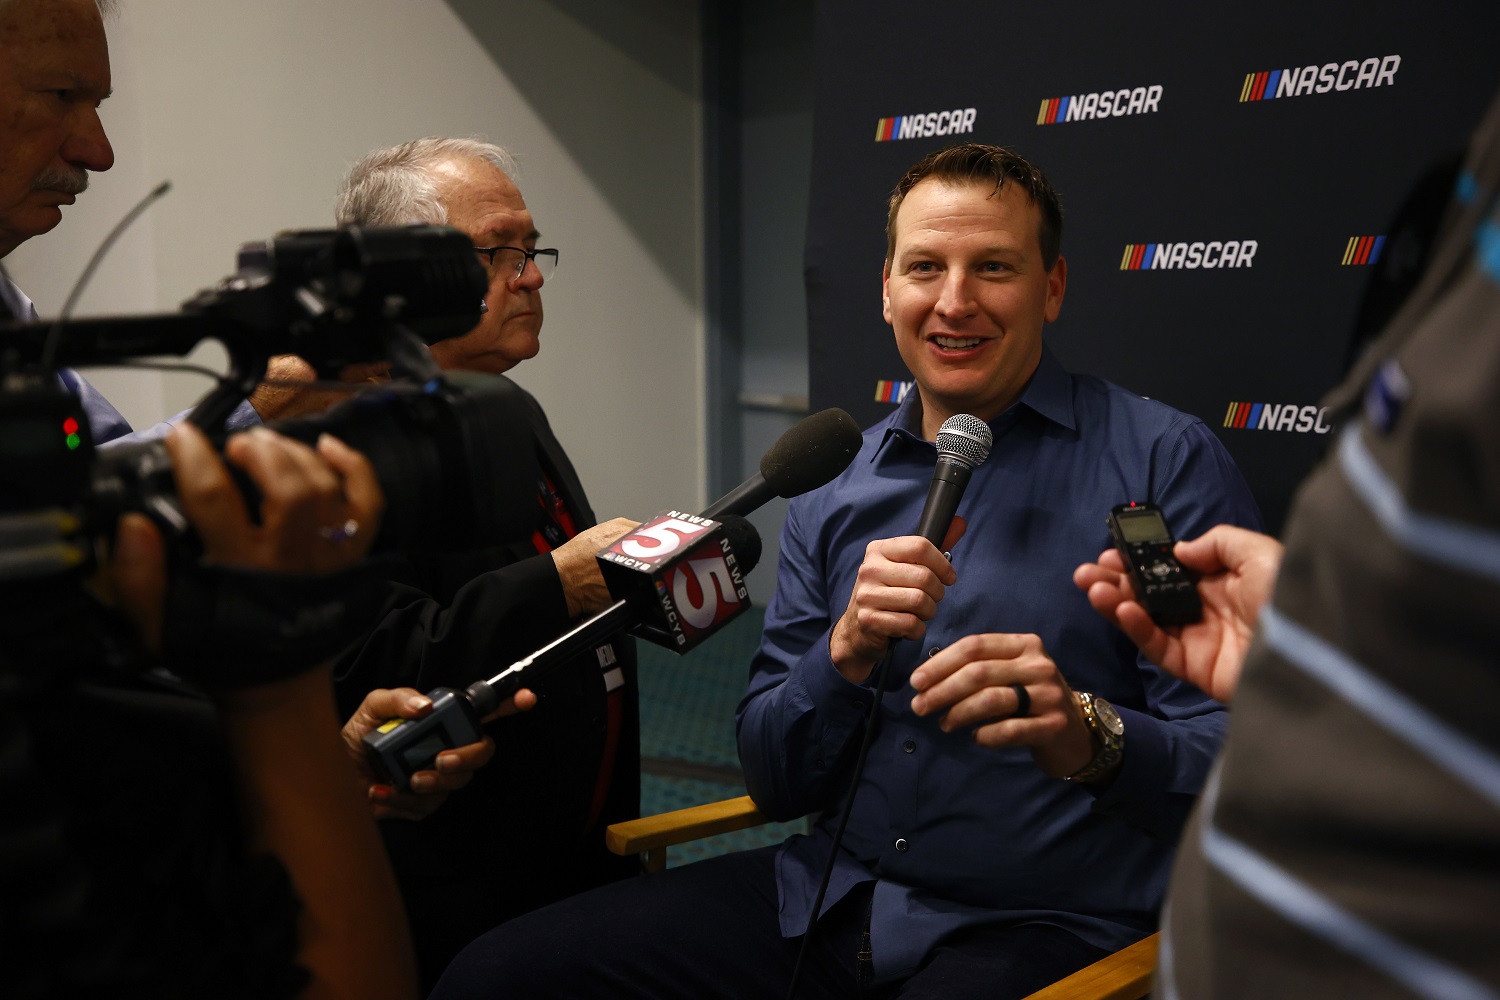 NASCAR driver Michael McDowell speaks with the media prior to the NASCAR Champion's Banquet at Music City Center on Dec. 2, 2021 in Nashville, Tennessee.